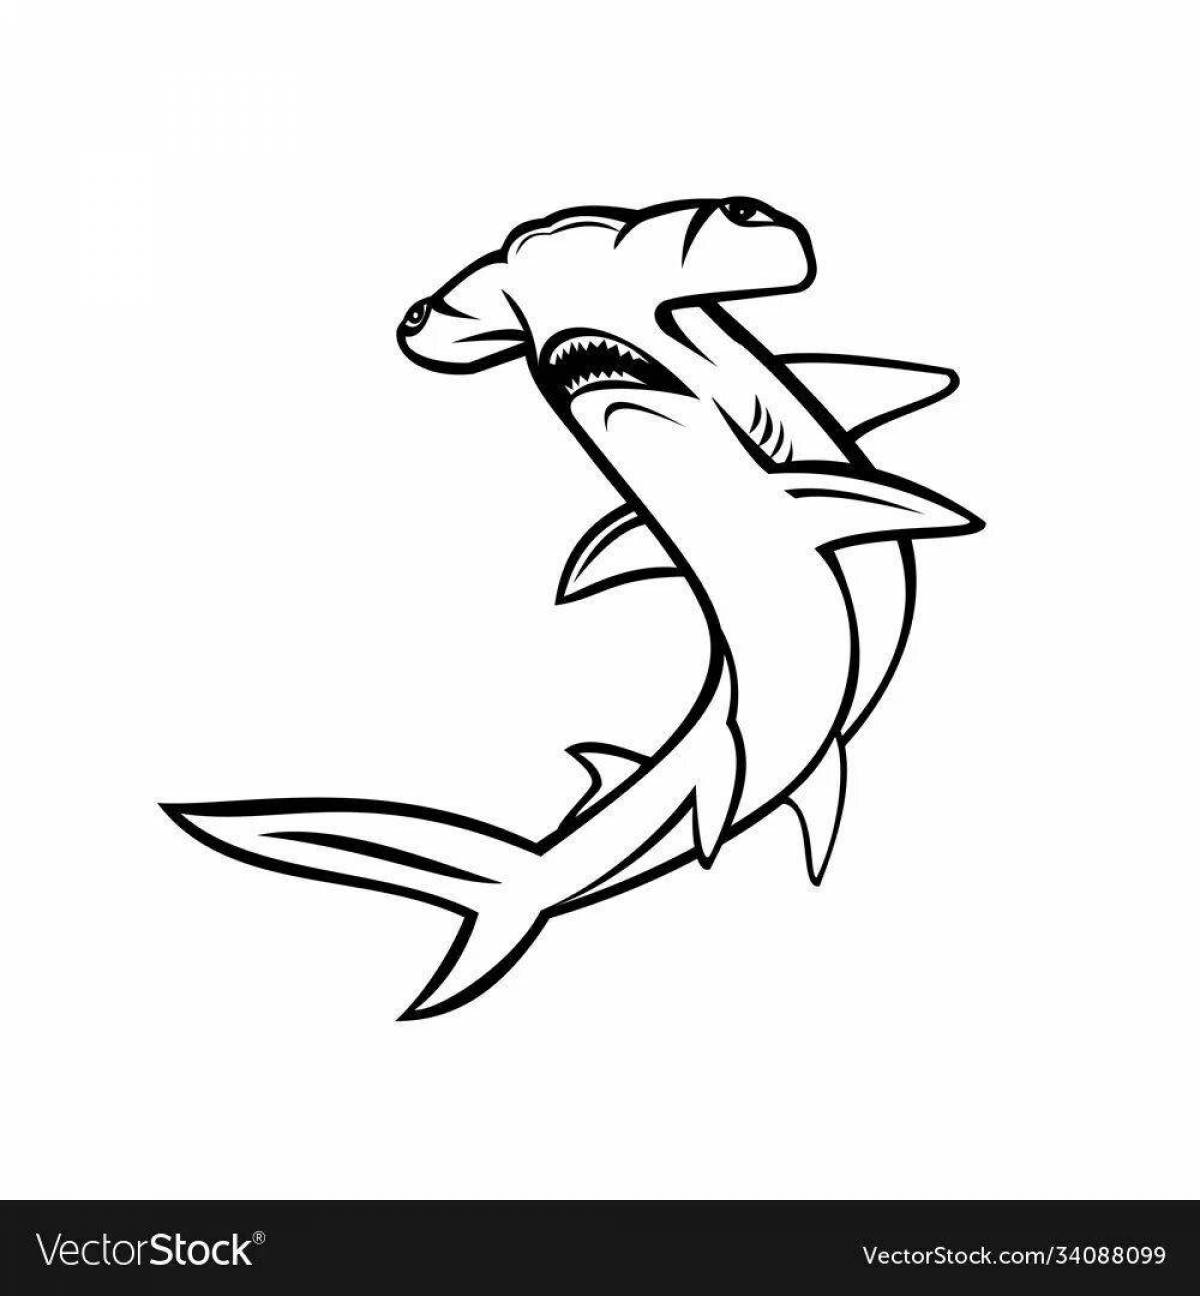 Magic hammerhead coloring page